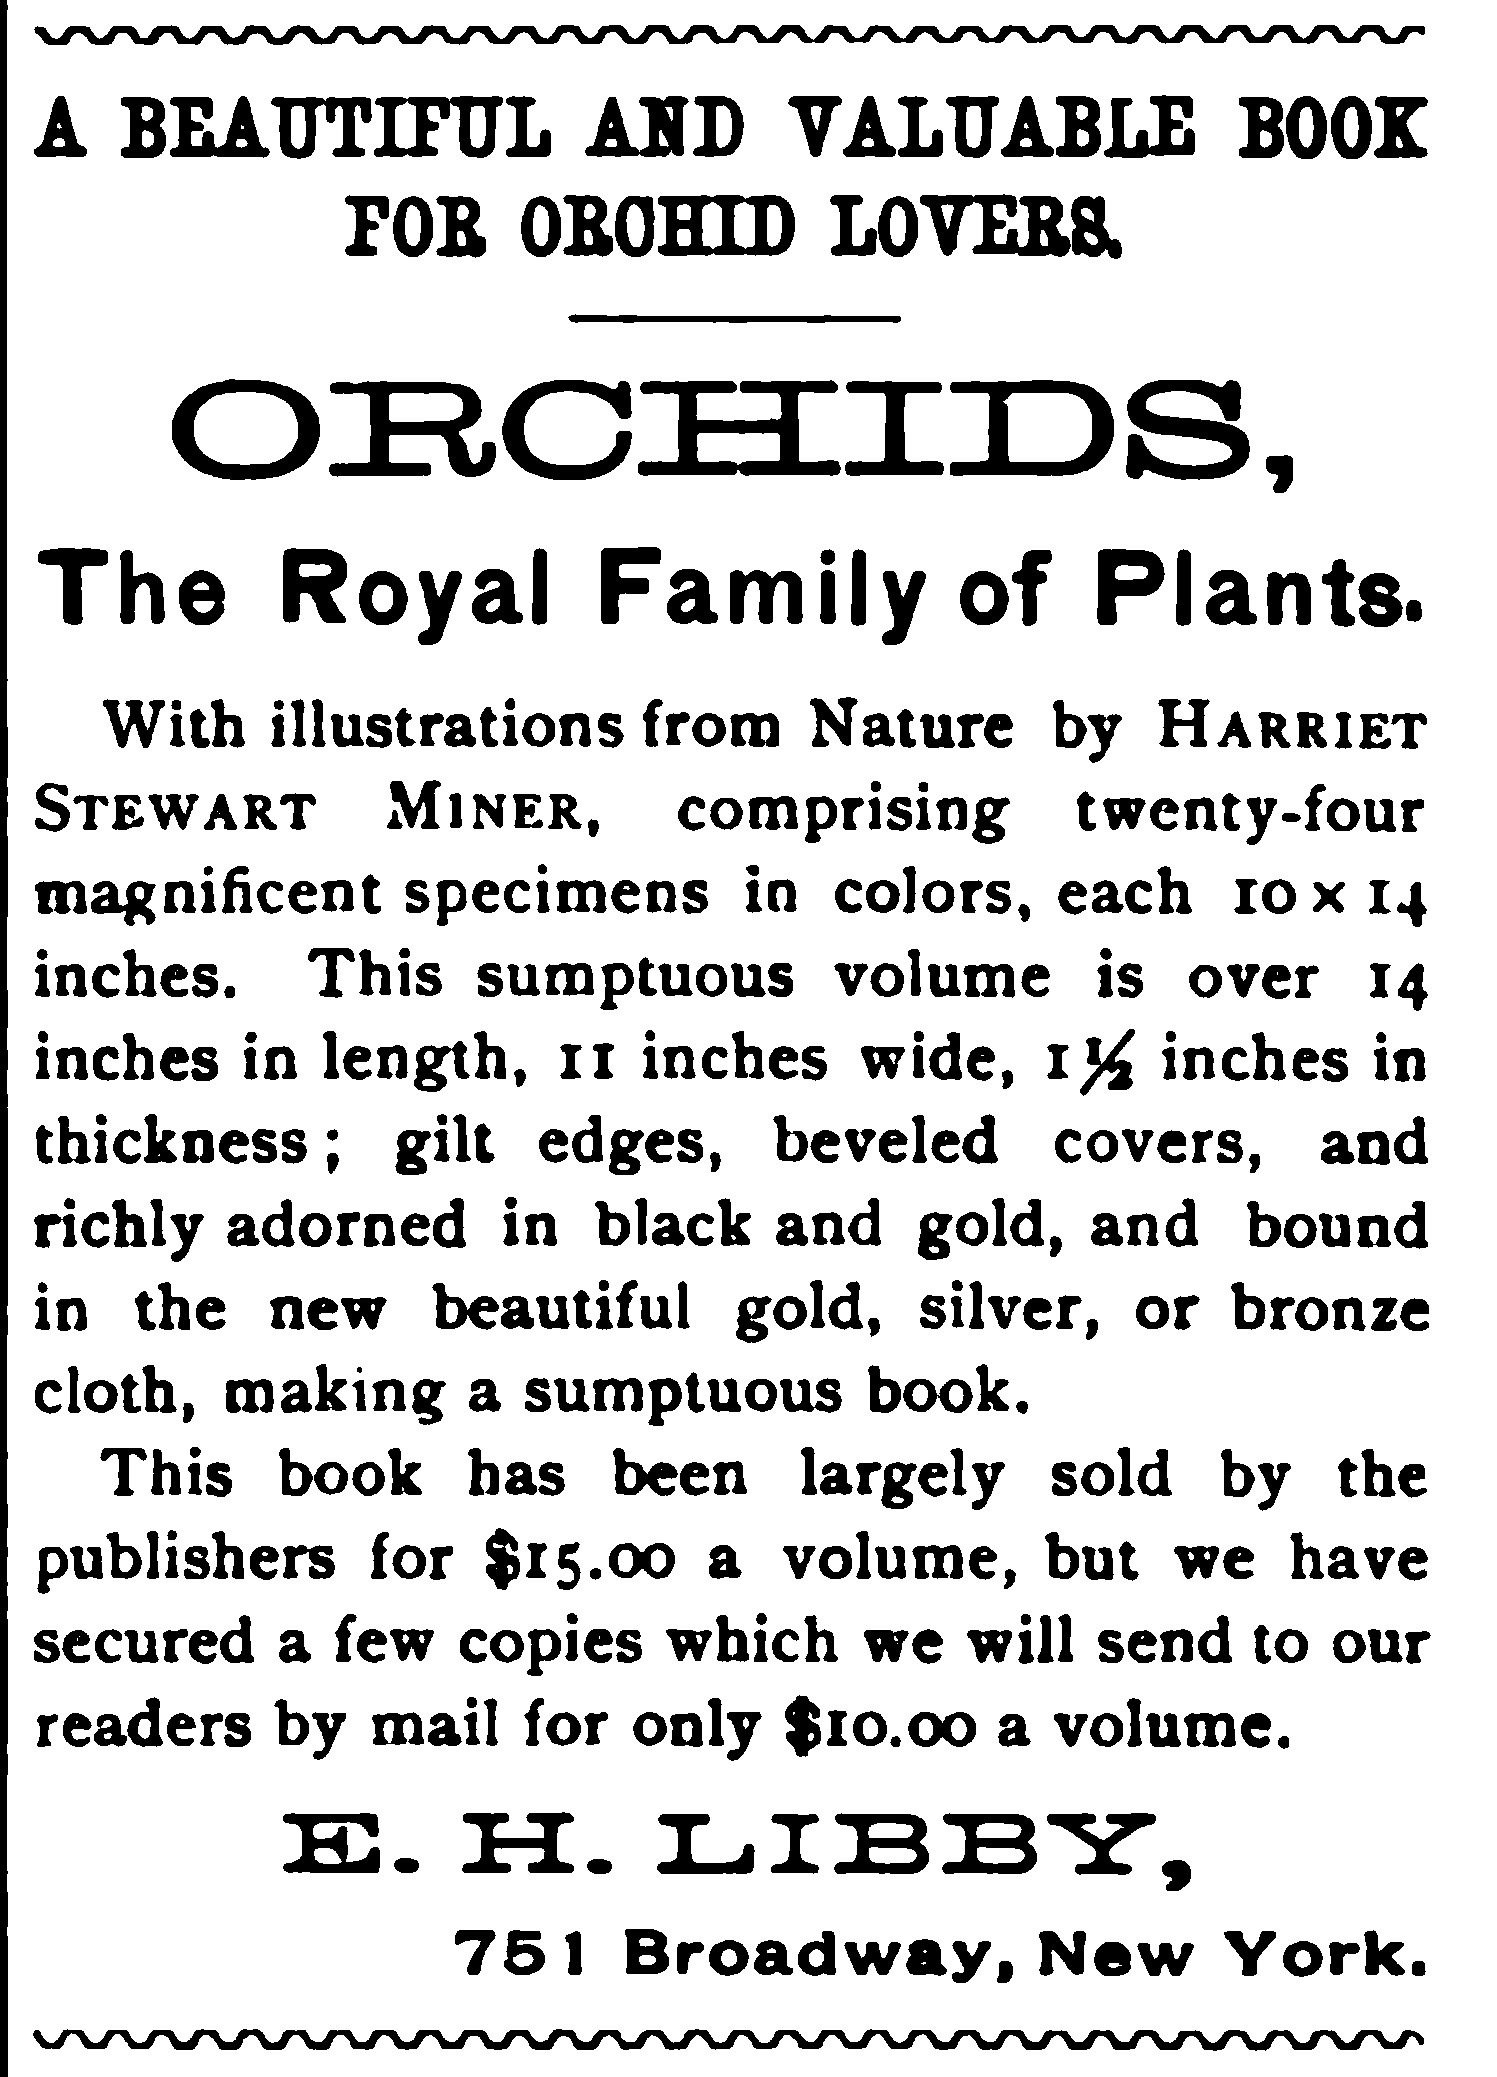 The_American_Garden-harriet-stewart-miner-orchids-the_royal_family_of_plants.png